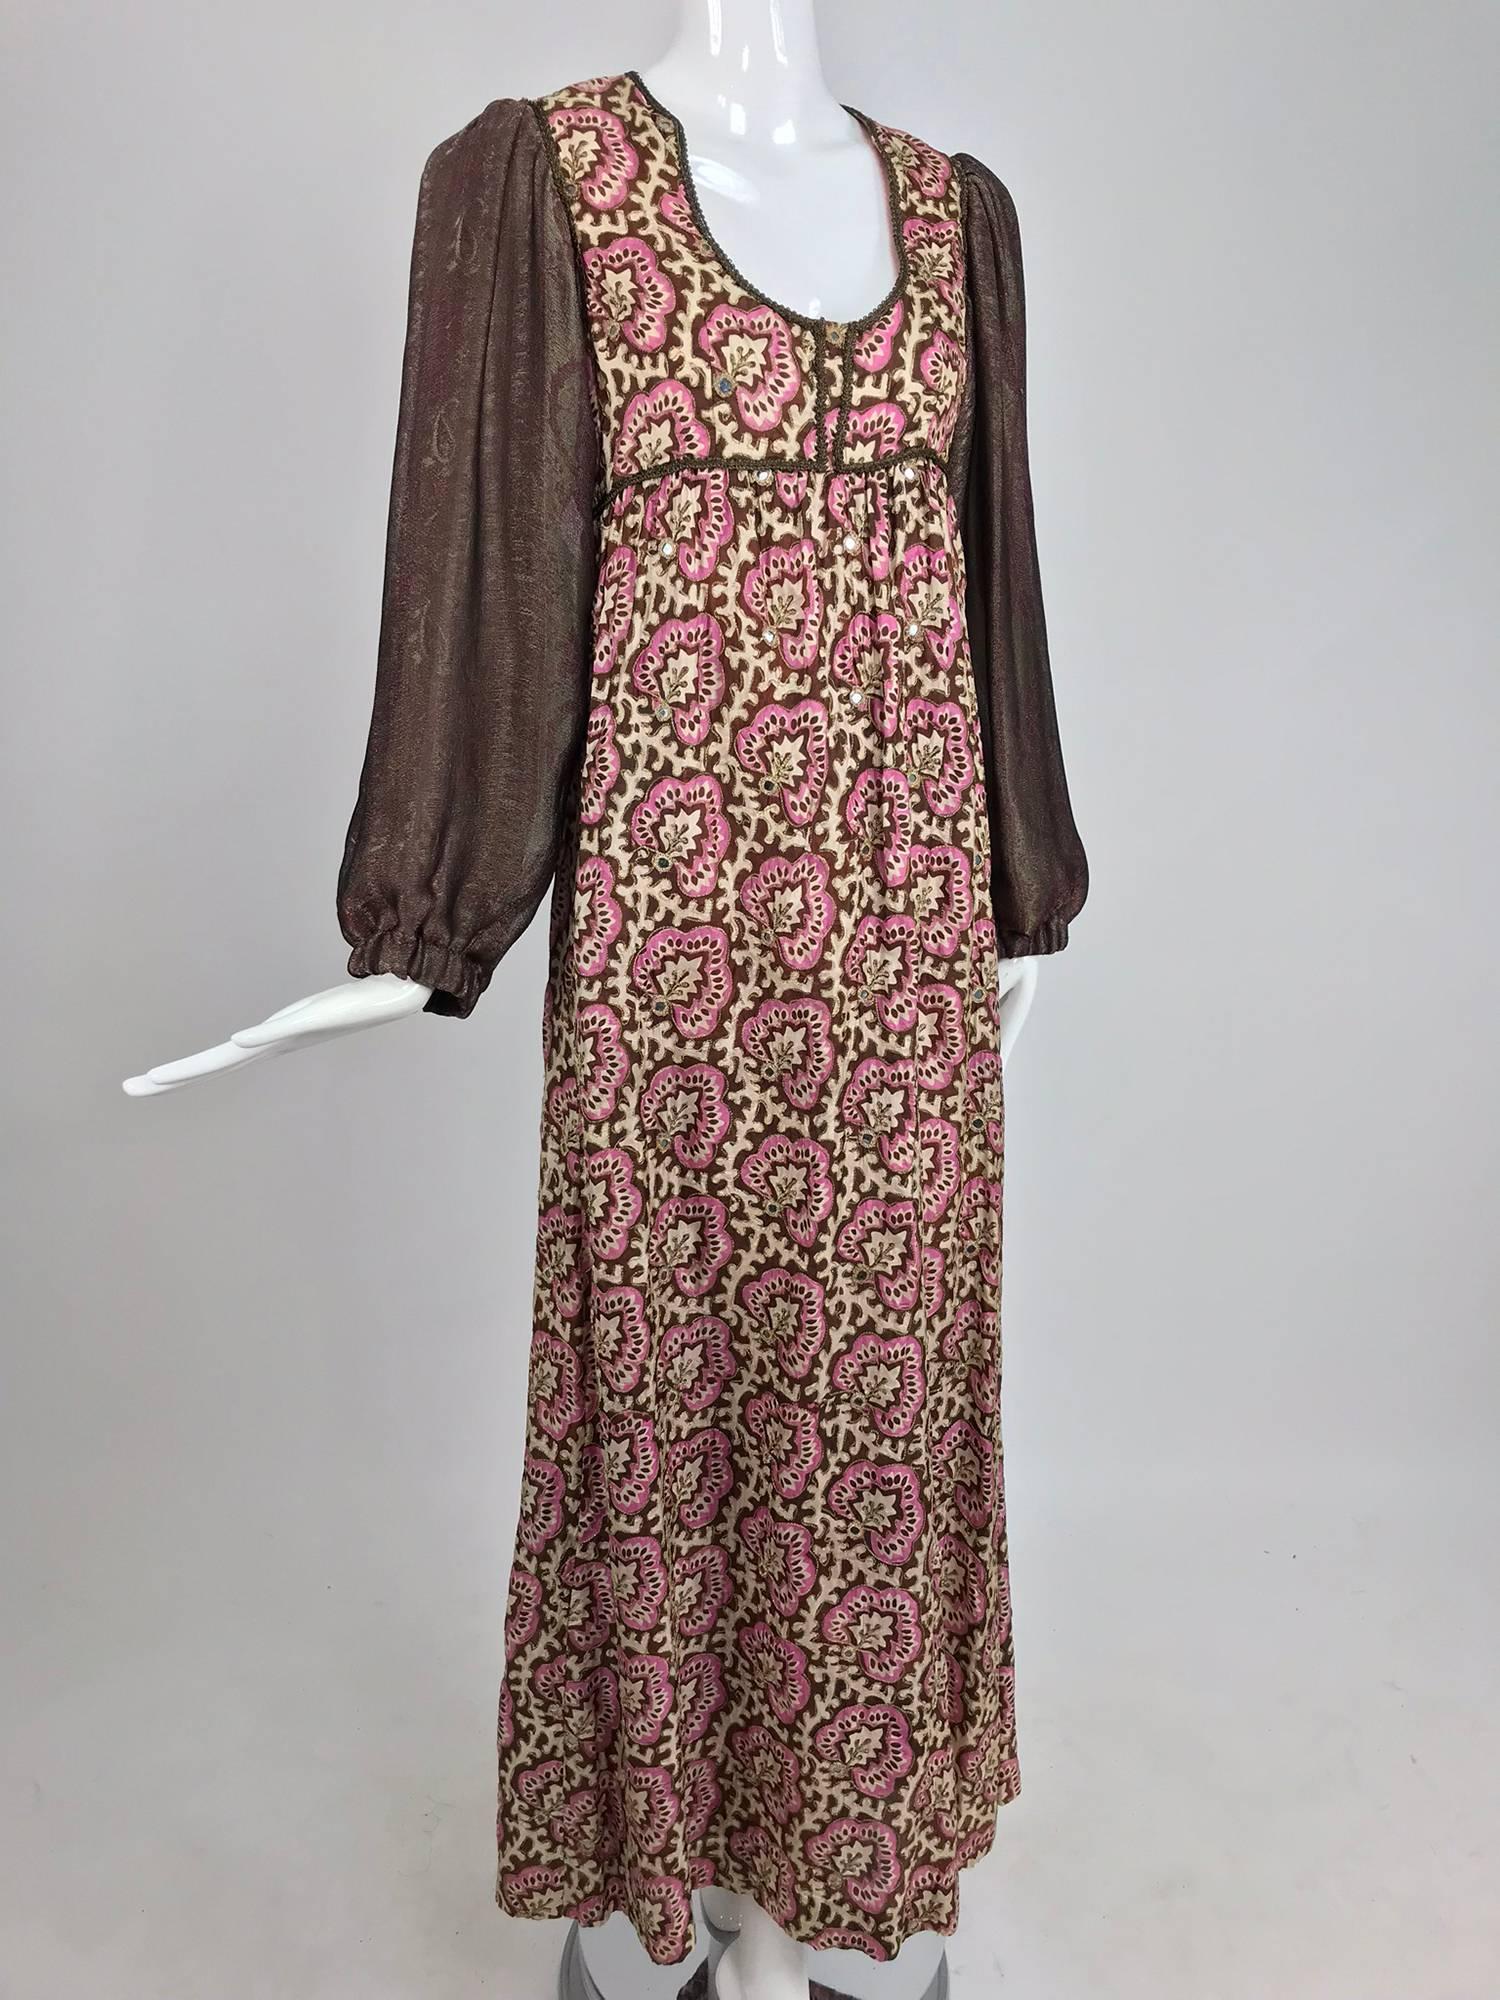 Thea Porter printed mirrored silk maxi dress with gold shot sleeves 1970s 10